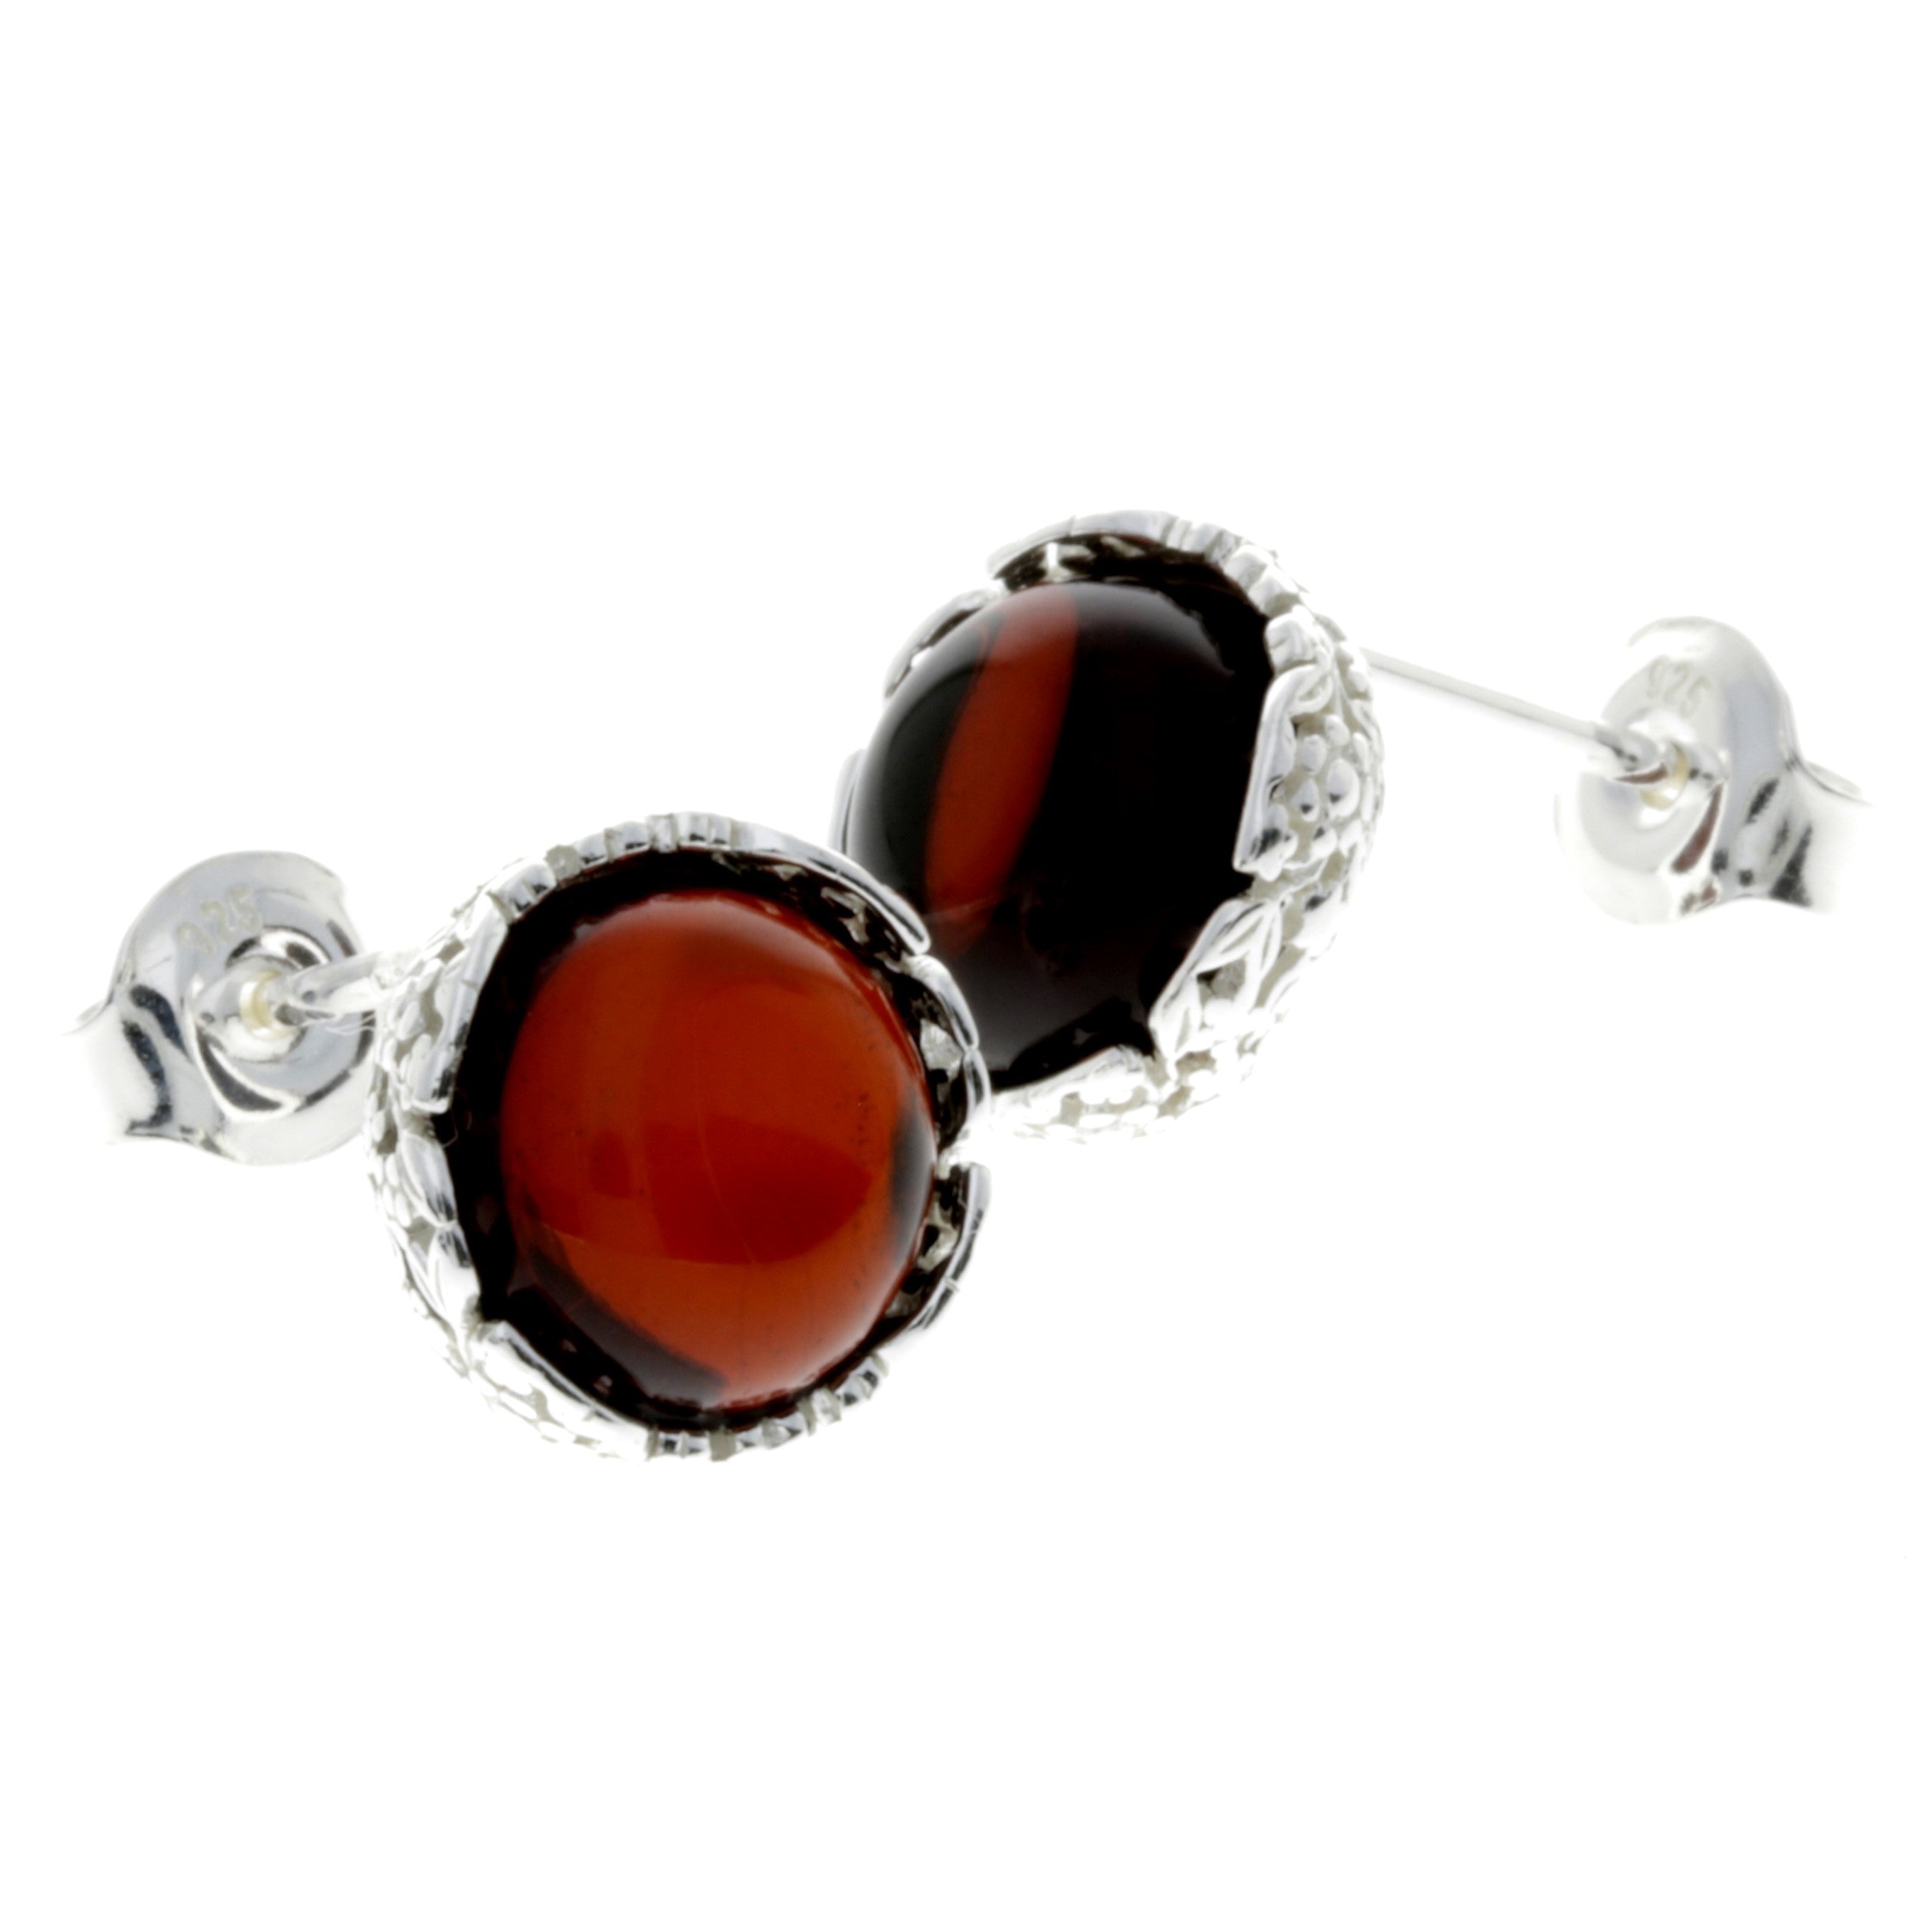 925 Sterling Silver & Genuine Baltic Amber Classic Round Studs Earrings - M649